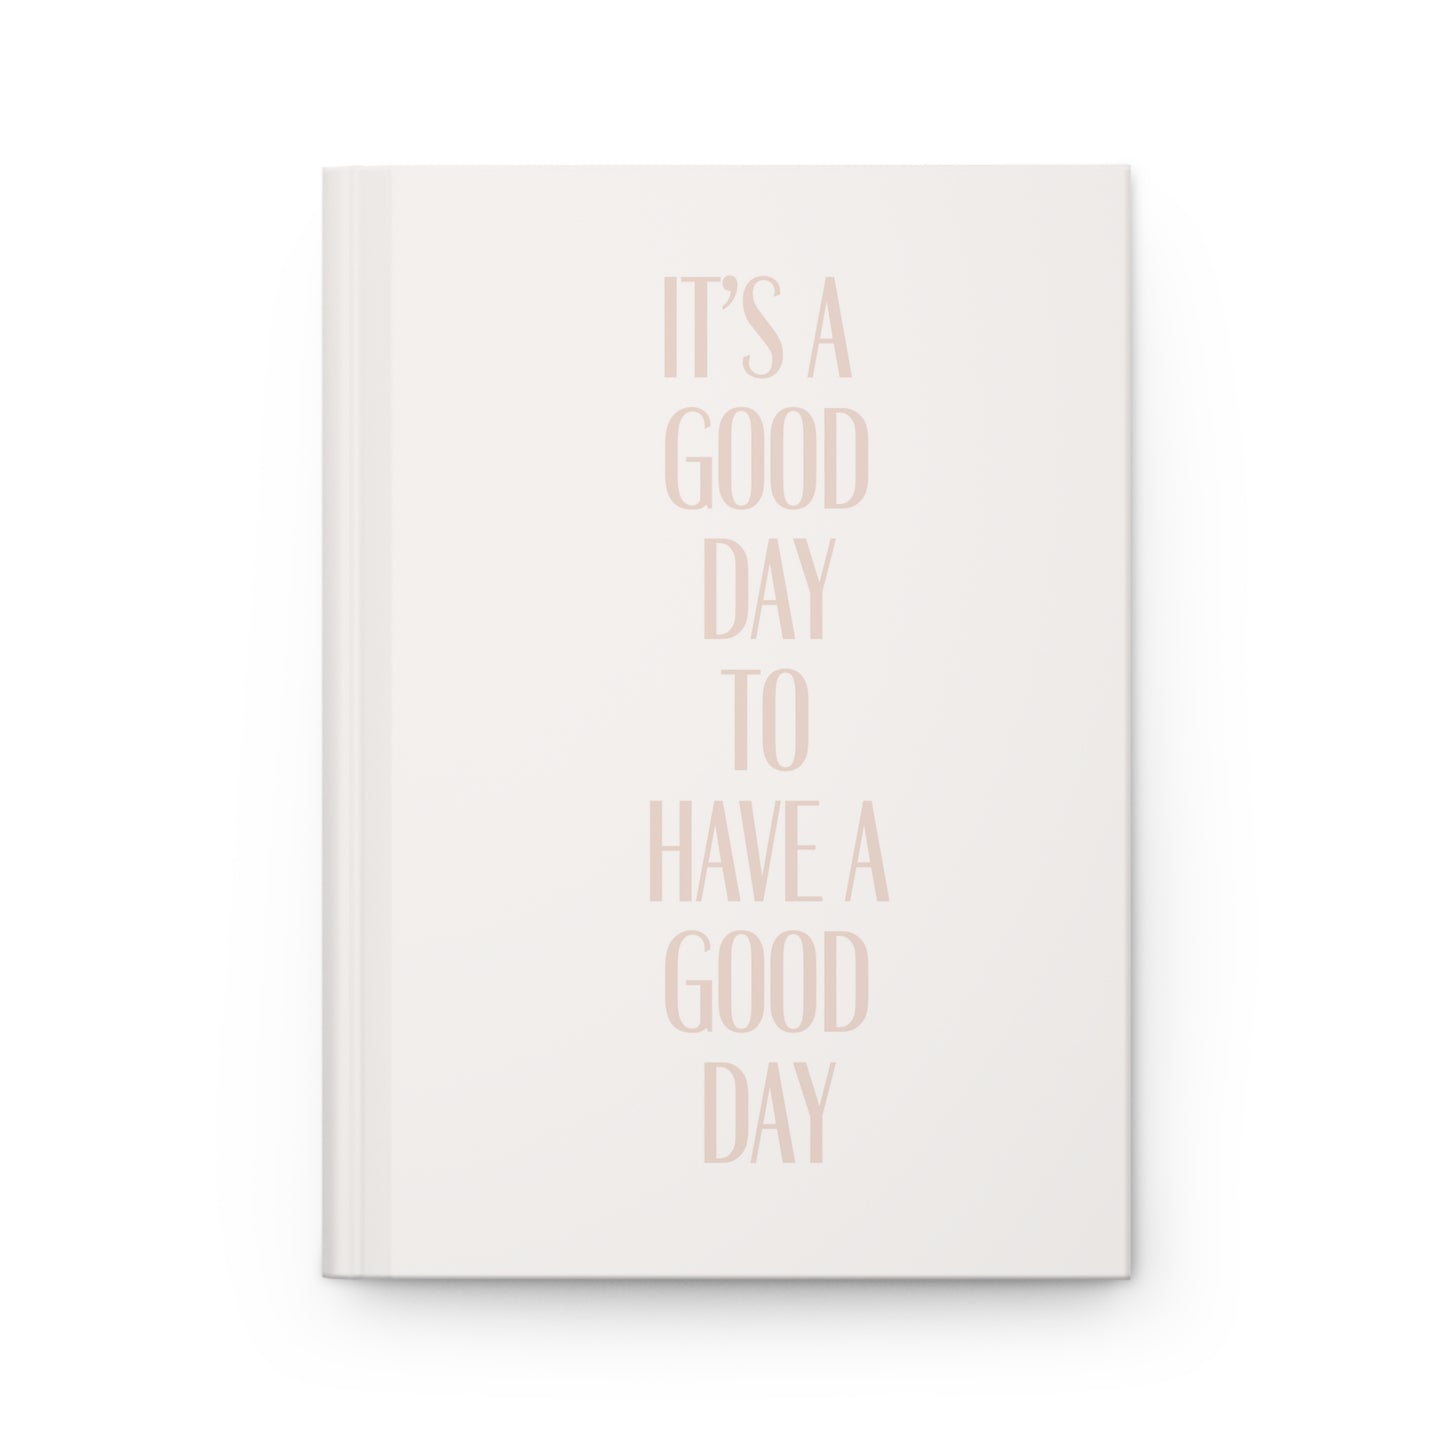 It's a Good Day to have a Good Day Hardcover Journal